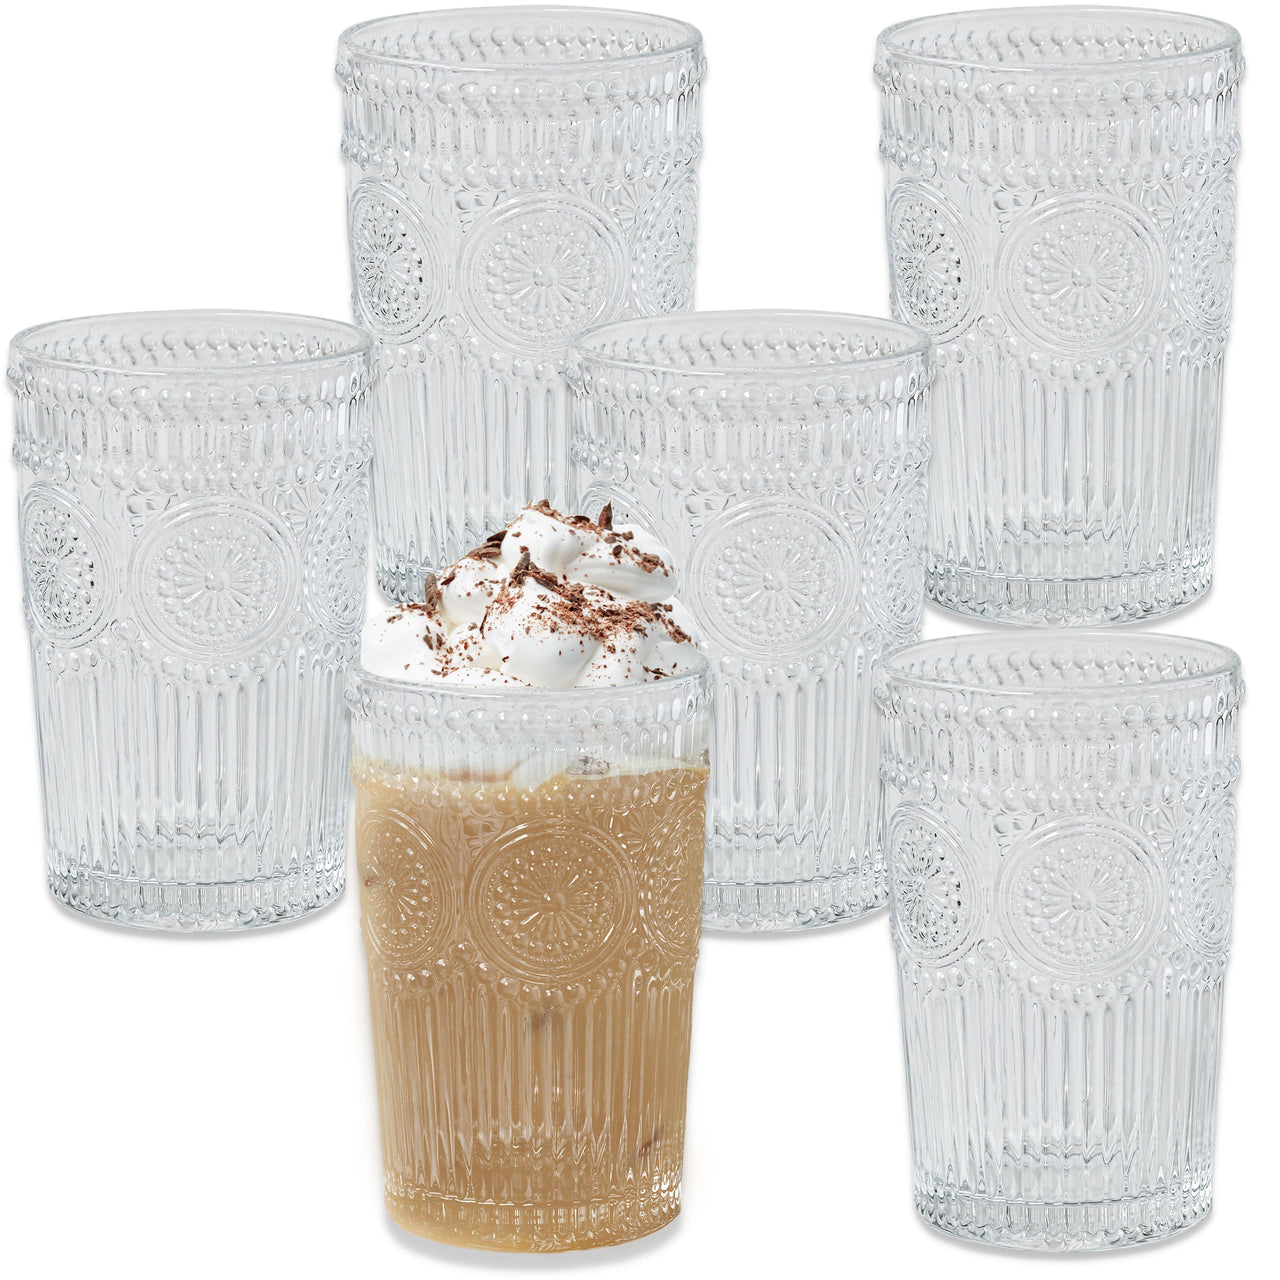 13 oz. Vintage Textured Clear Drinking Glass Cups (Set of 6) - Alternate Image 8 | My Wedding Favors